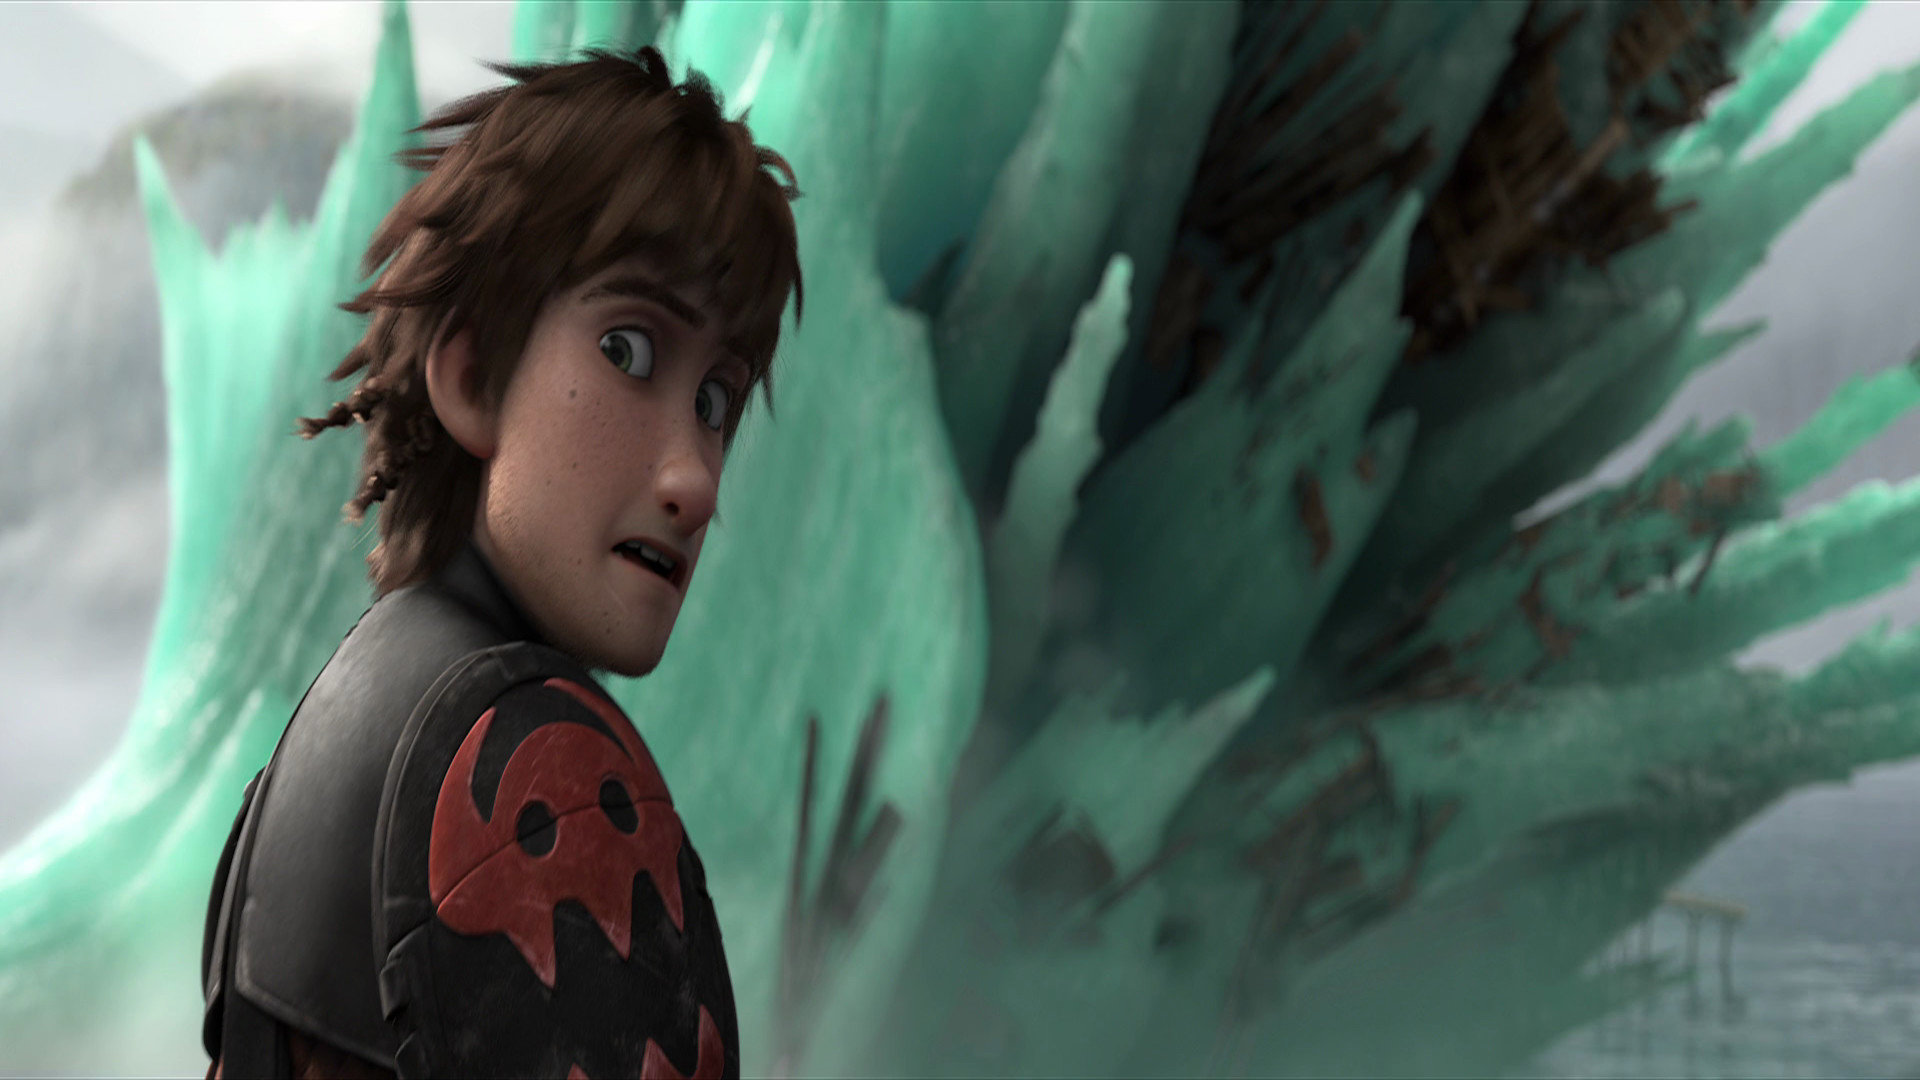 Download full hd 1080p How To Train Your Dragon 2 desktop background ID:90326 for free